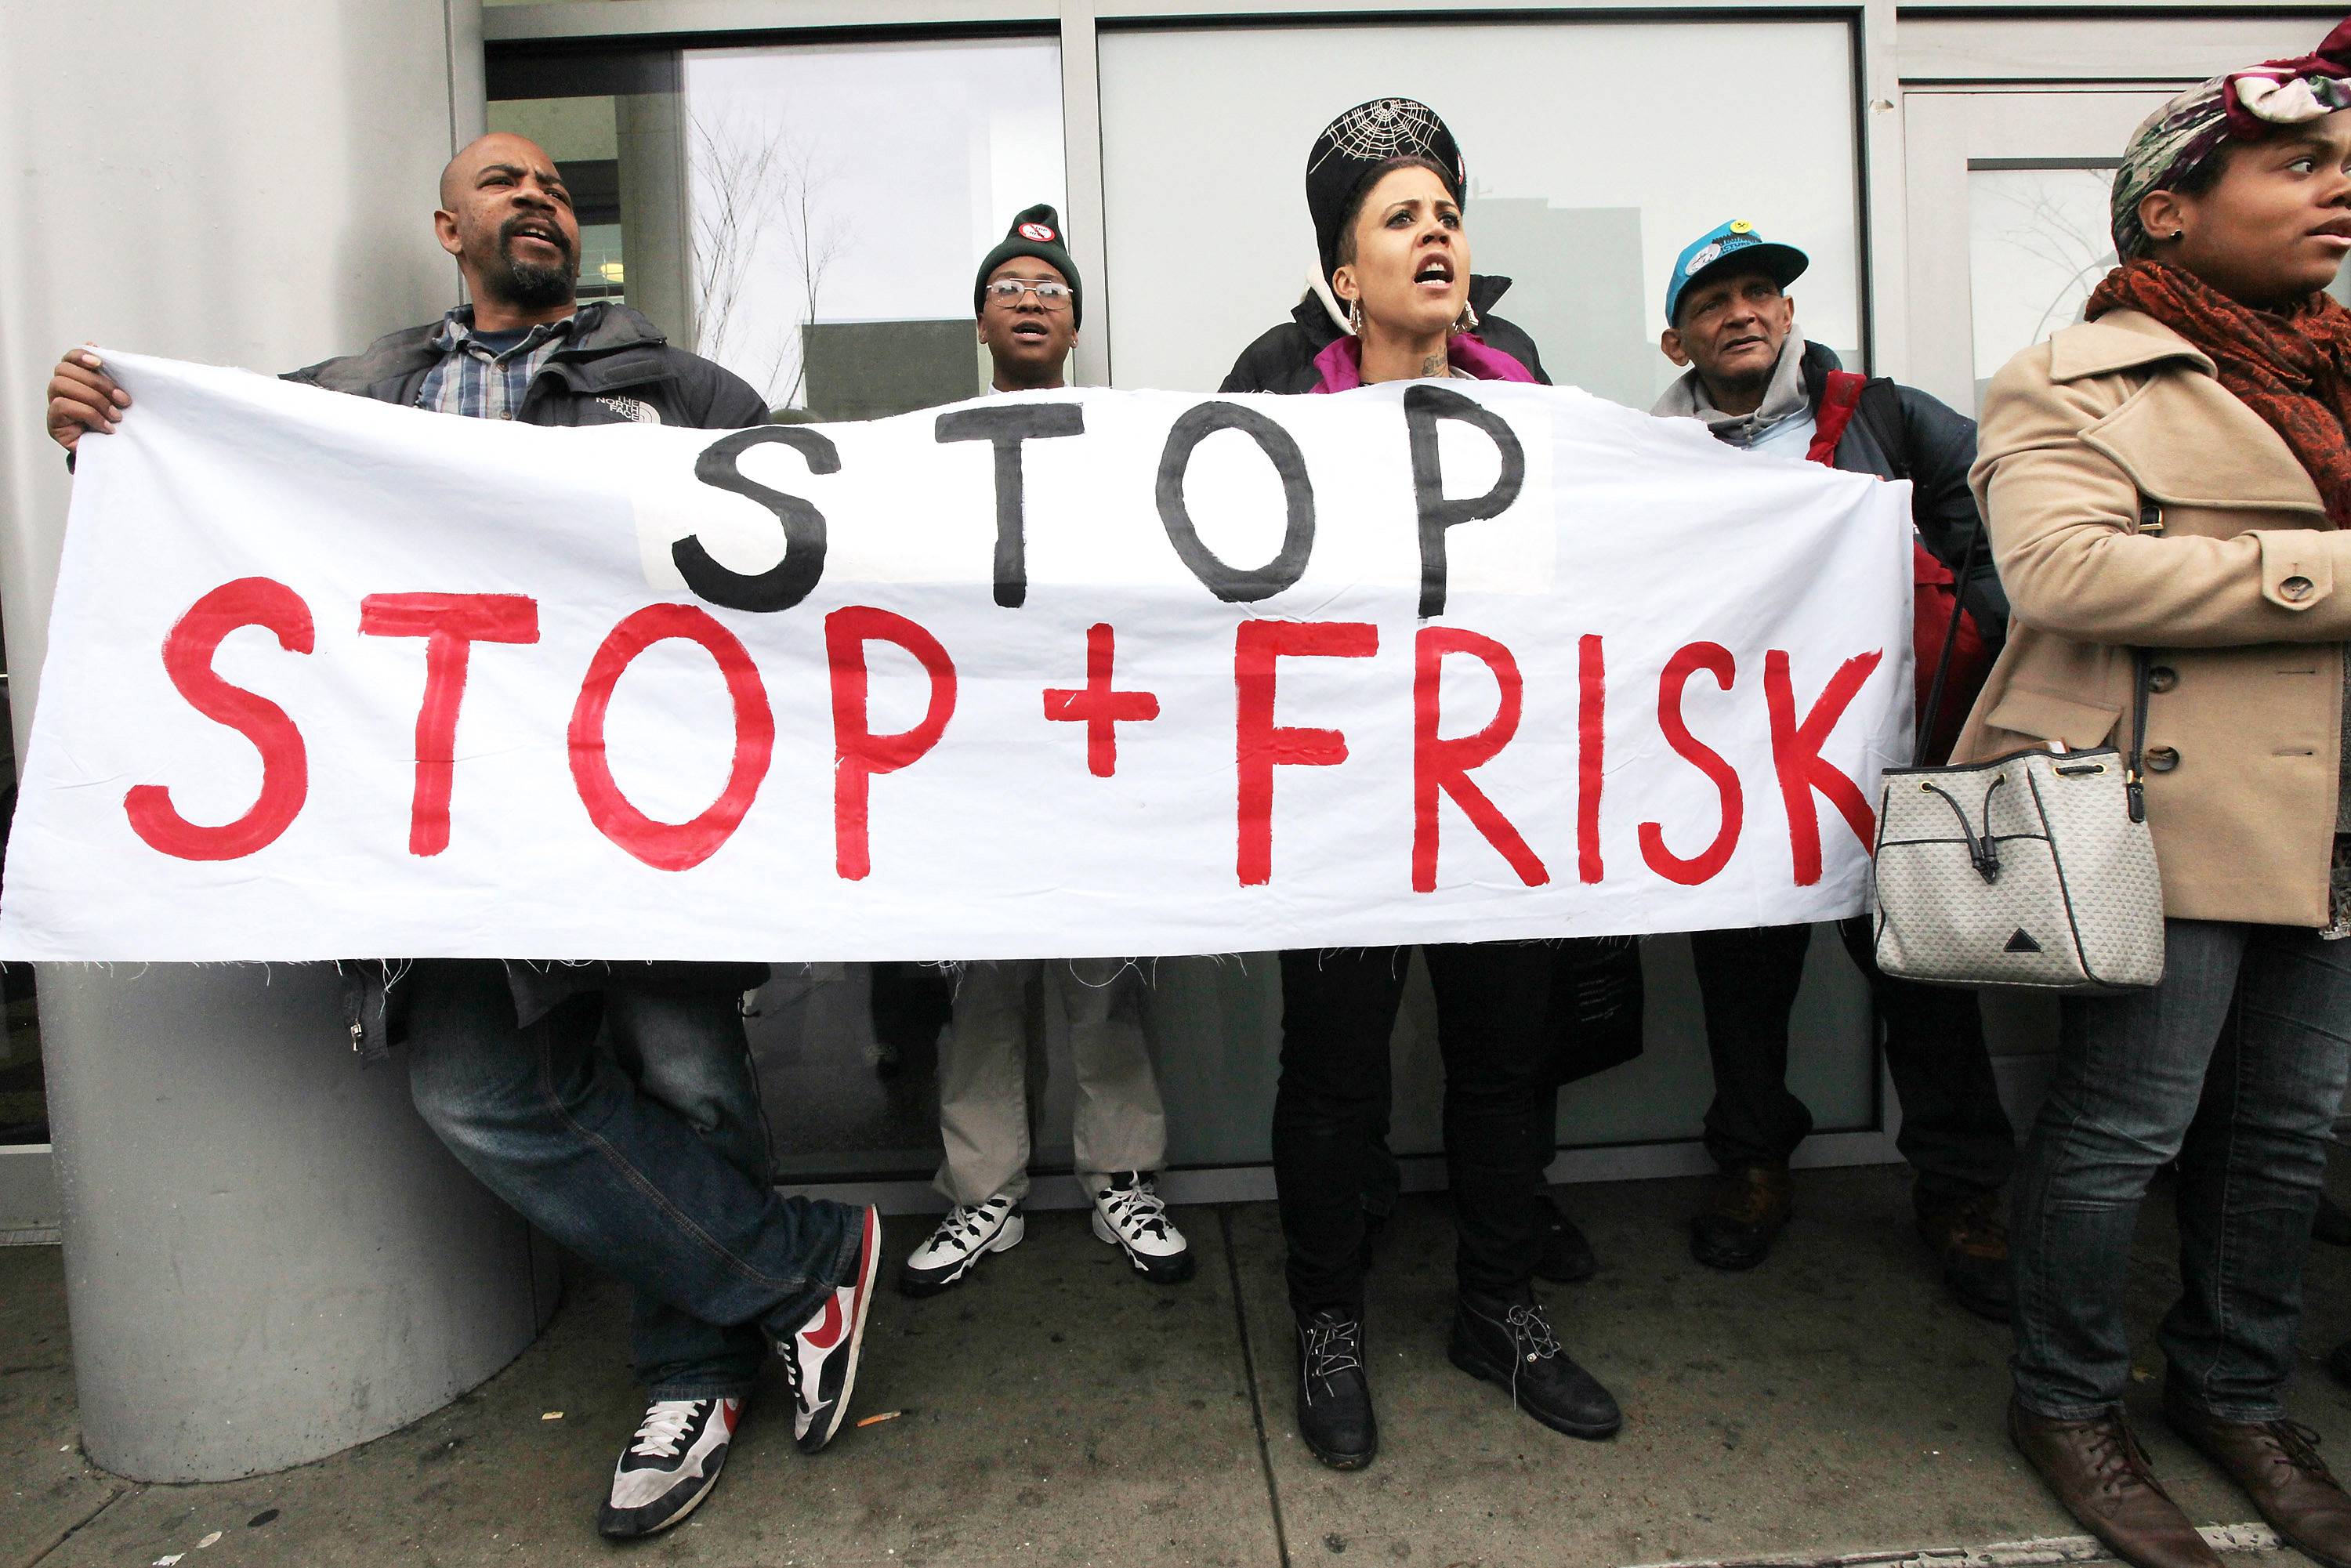 NYPD, Stop-and-Risk, racial profiling